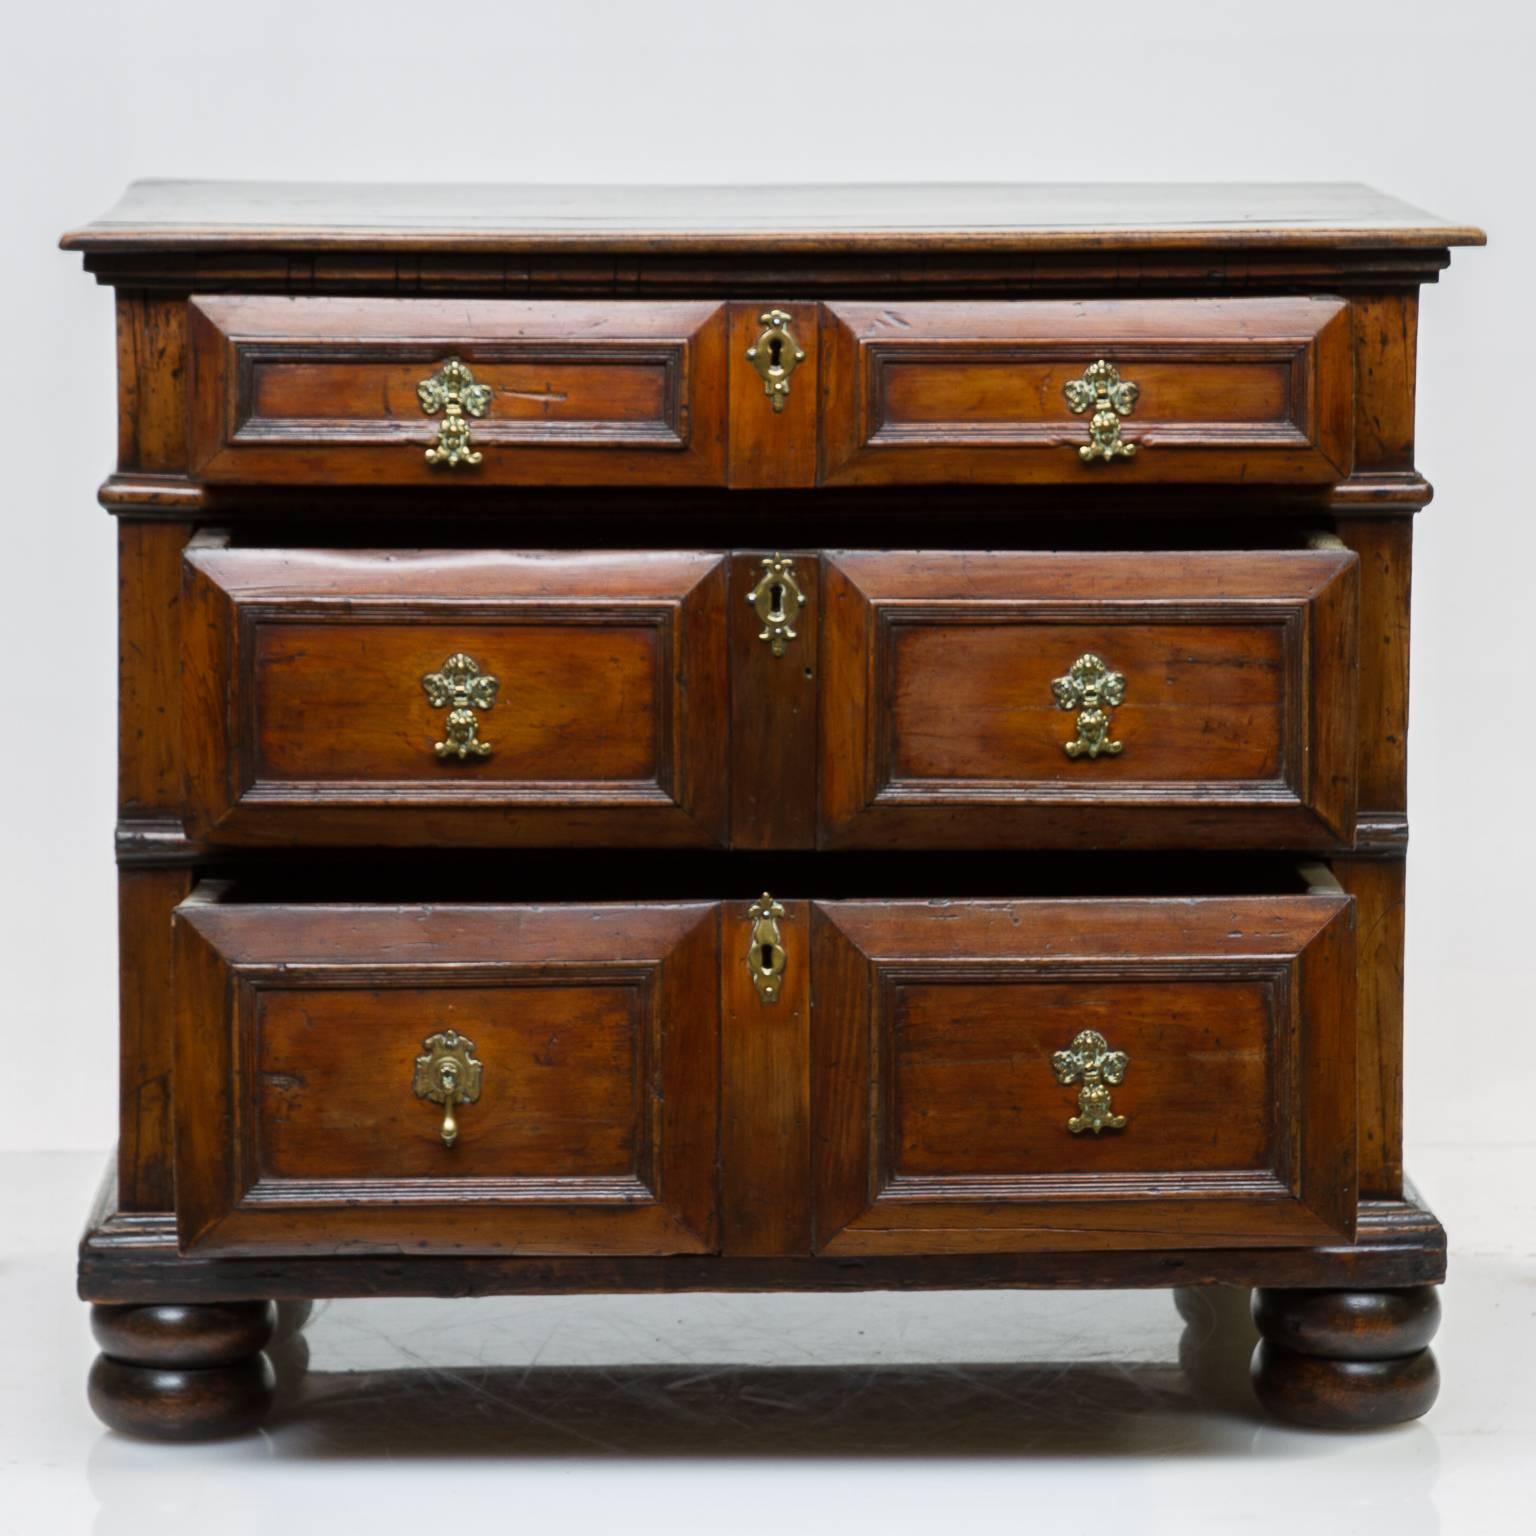 18th century yew wood chest of drawers. This chest has three drawers with raised panels and molding on each drawer. Nice brass pulls. Paneled sides. Worn top with beautiful color. Top is made of oak. Resting on a double burn foot. Nice brass pulls